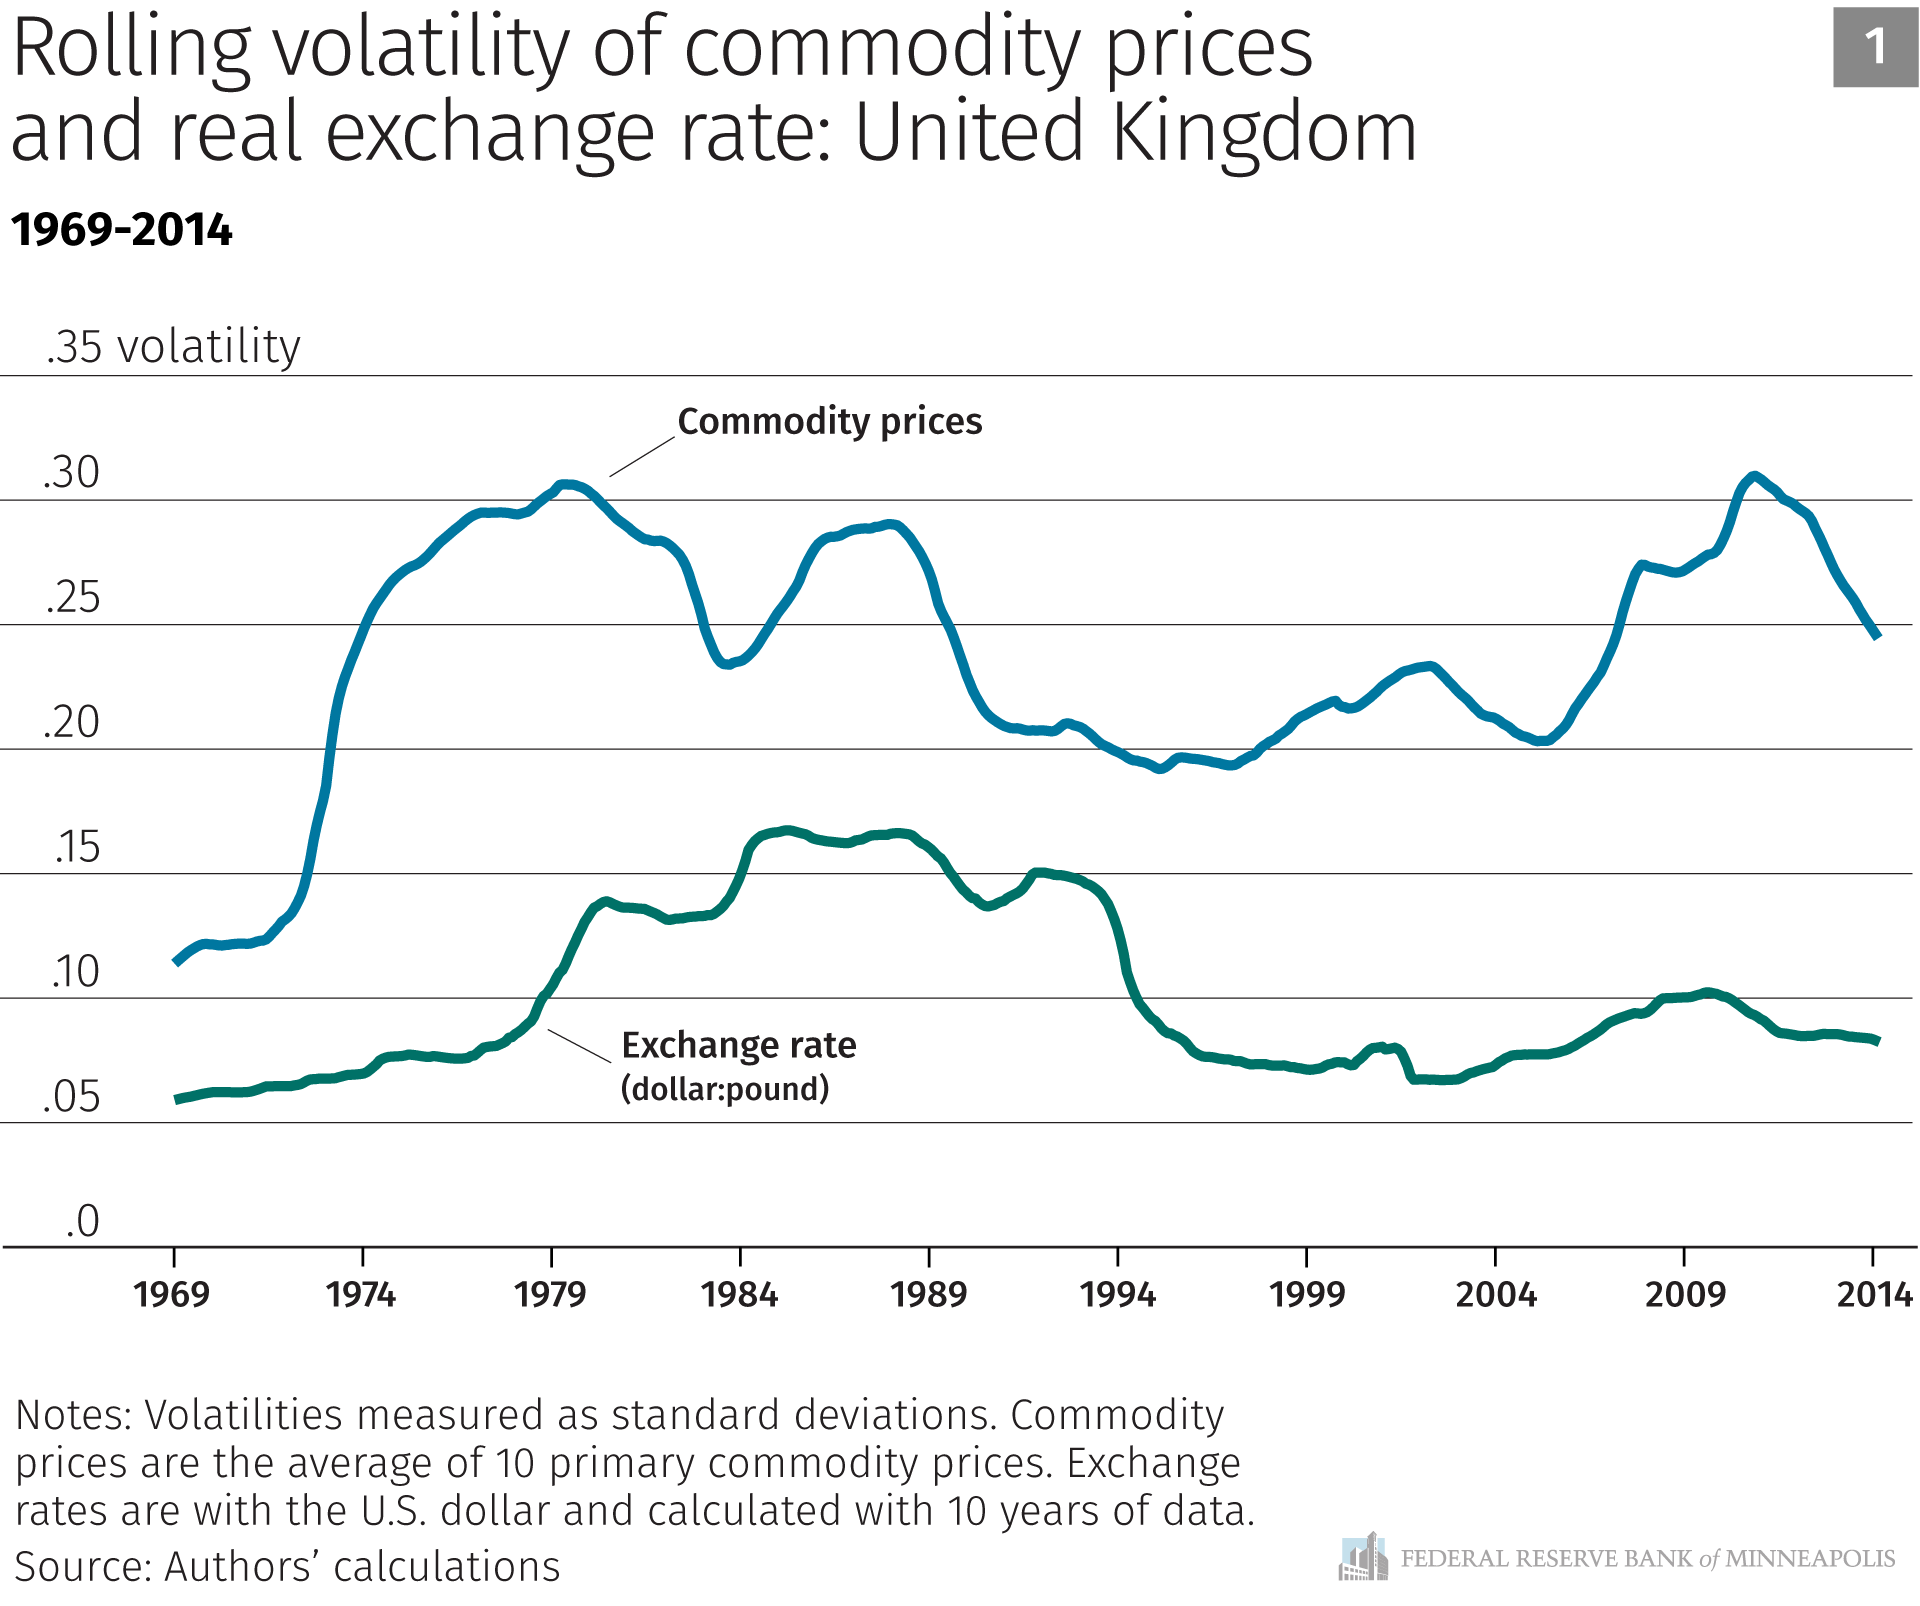 Rolling volatility of commodity prices and real exchange rate: United Kingdom